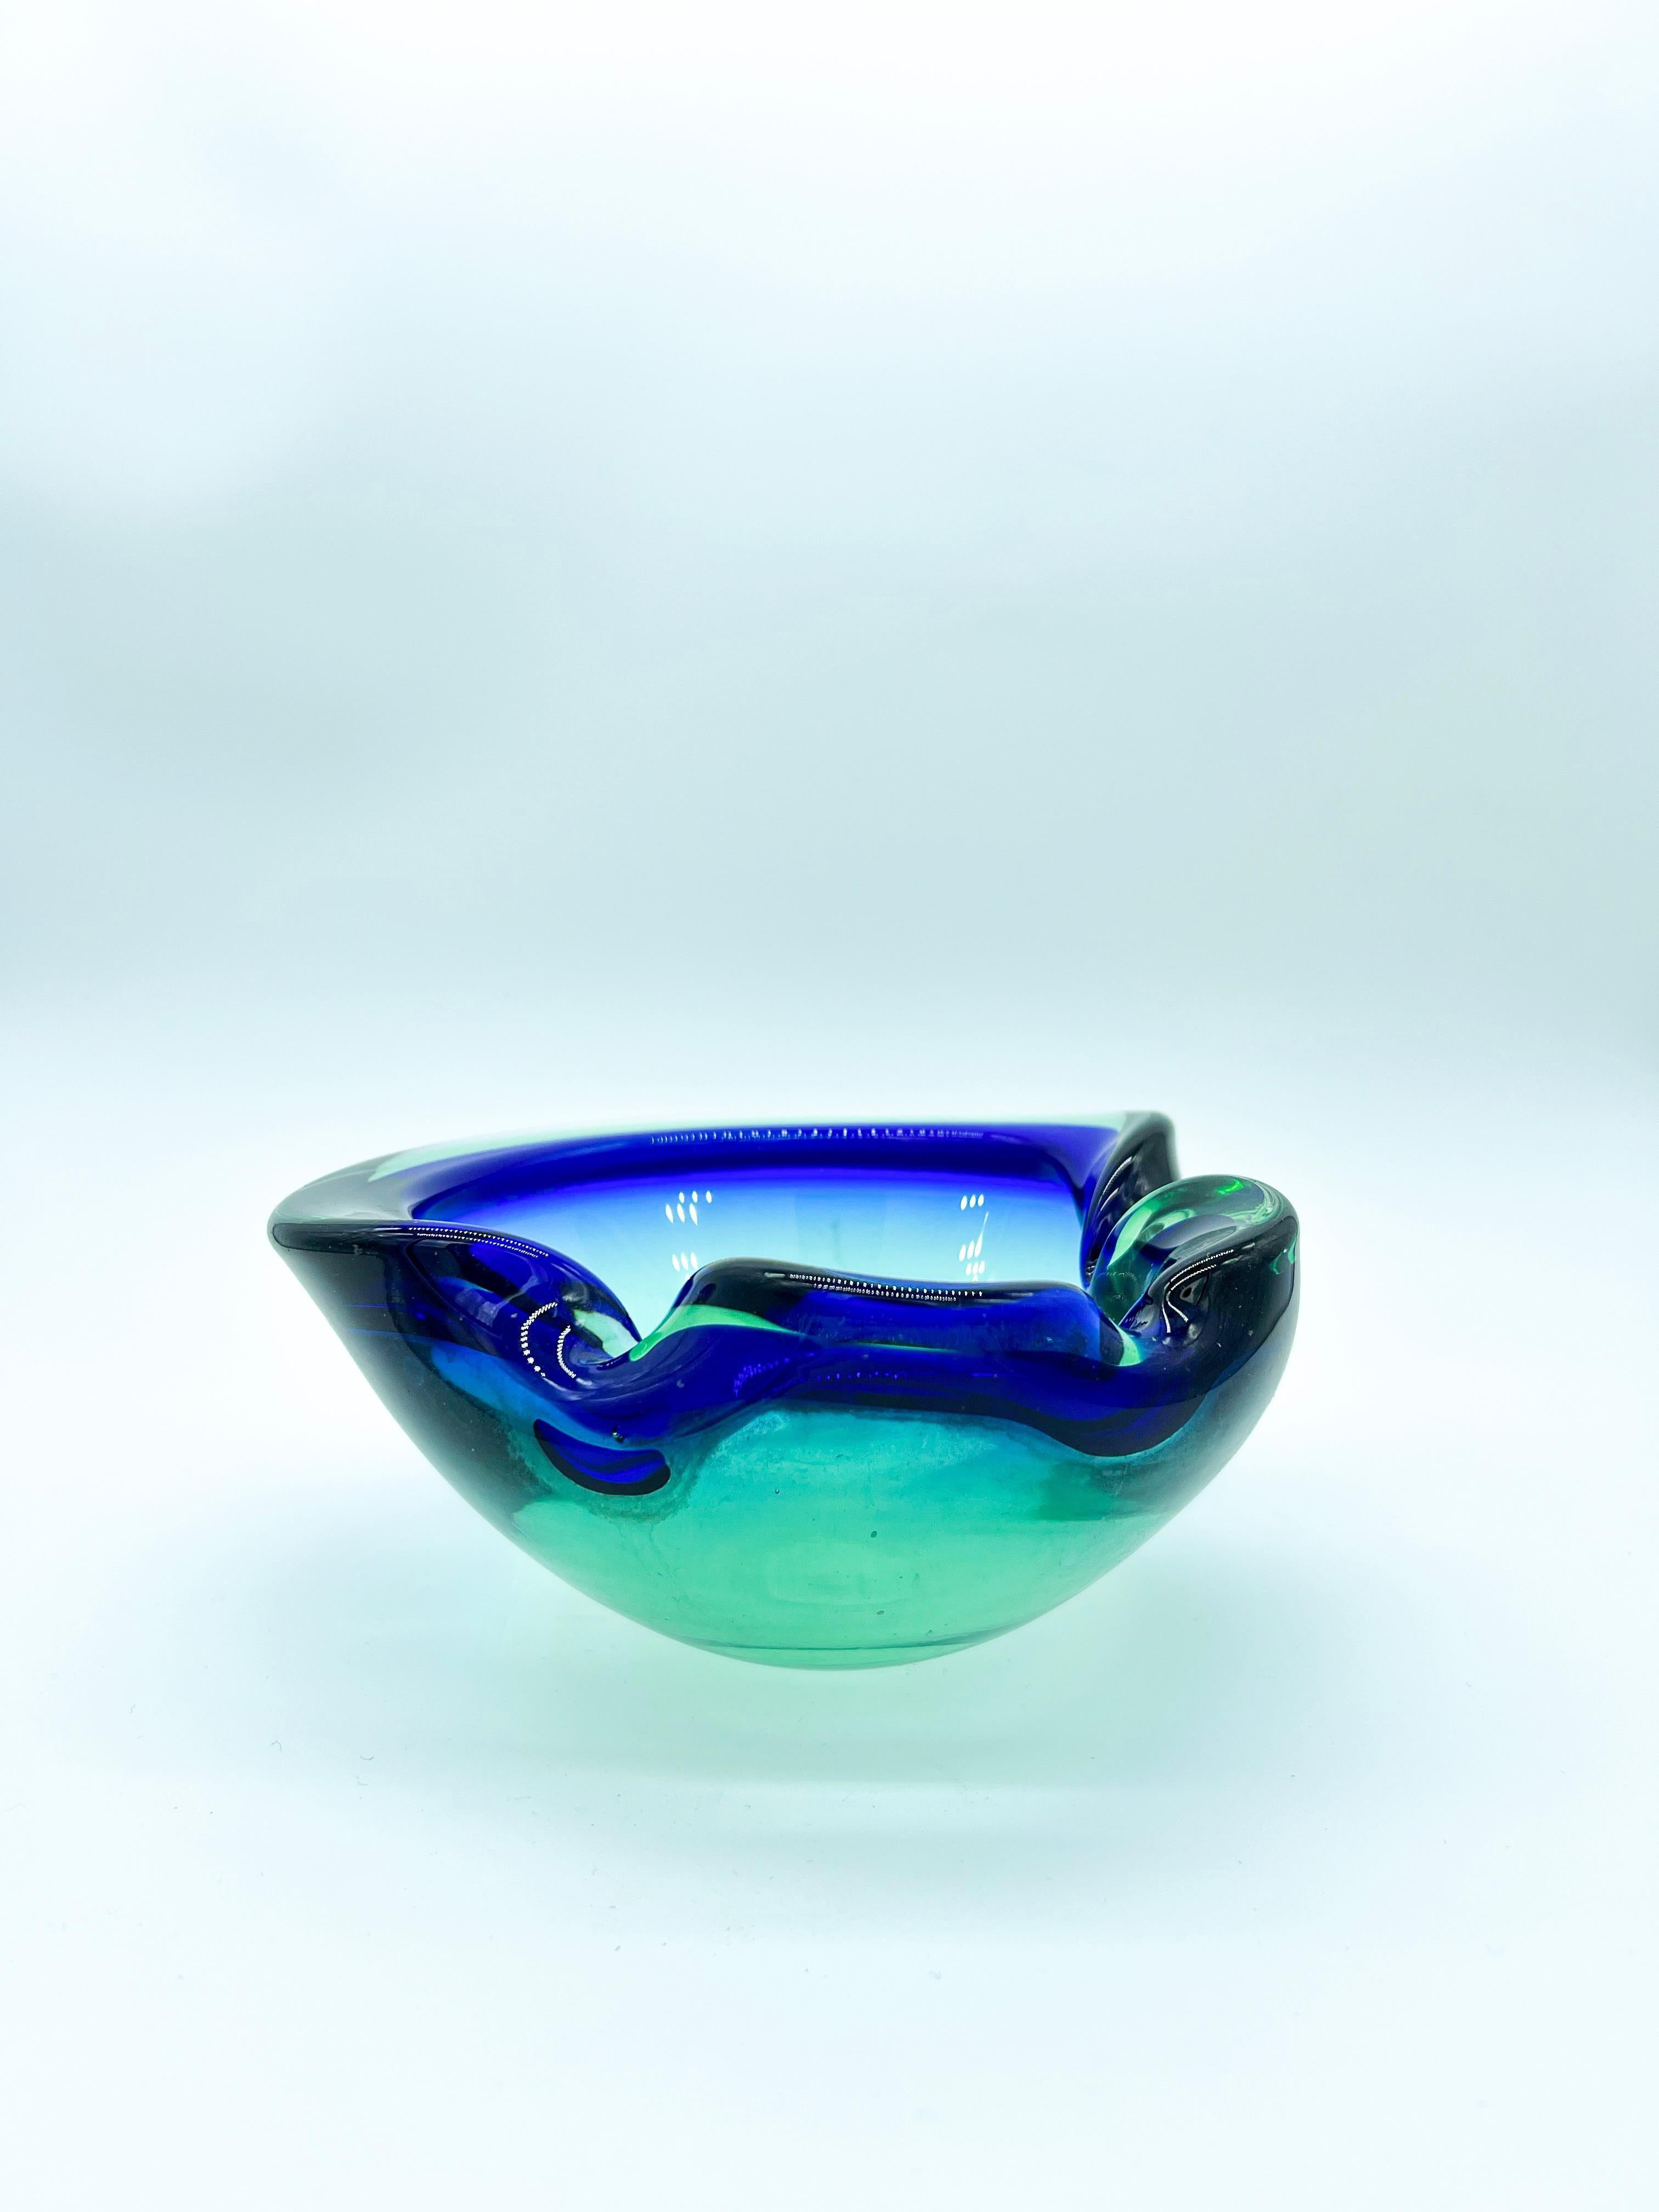 Vintage Big and Heavy Murano Bowl in Deep Blue and Mint Green 